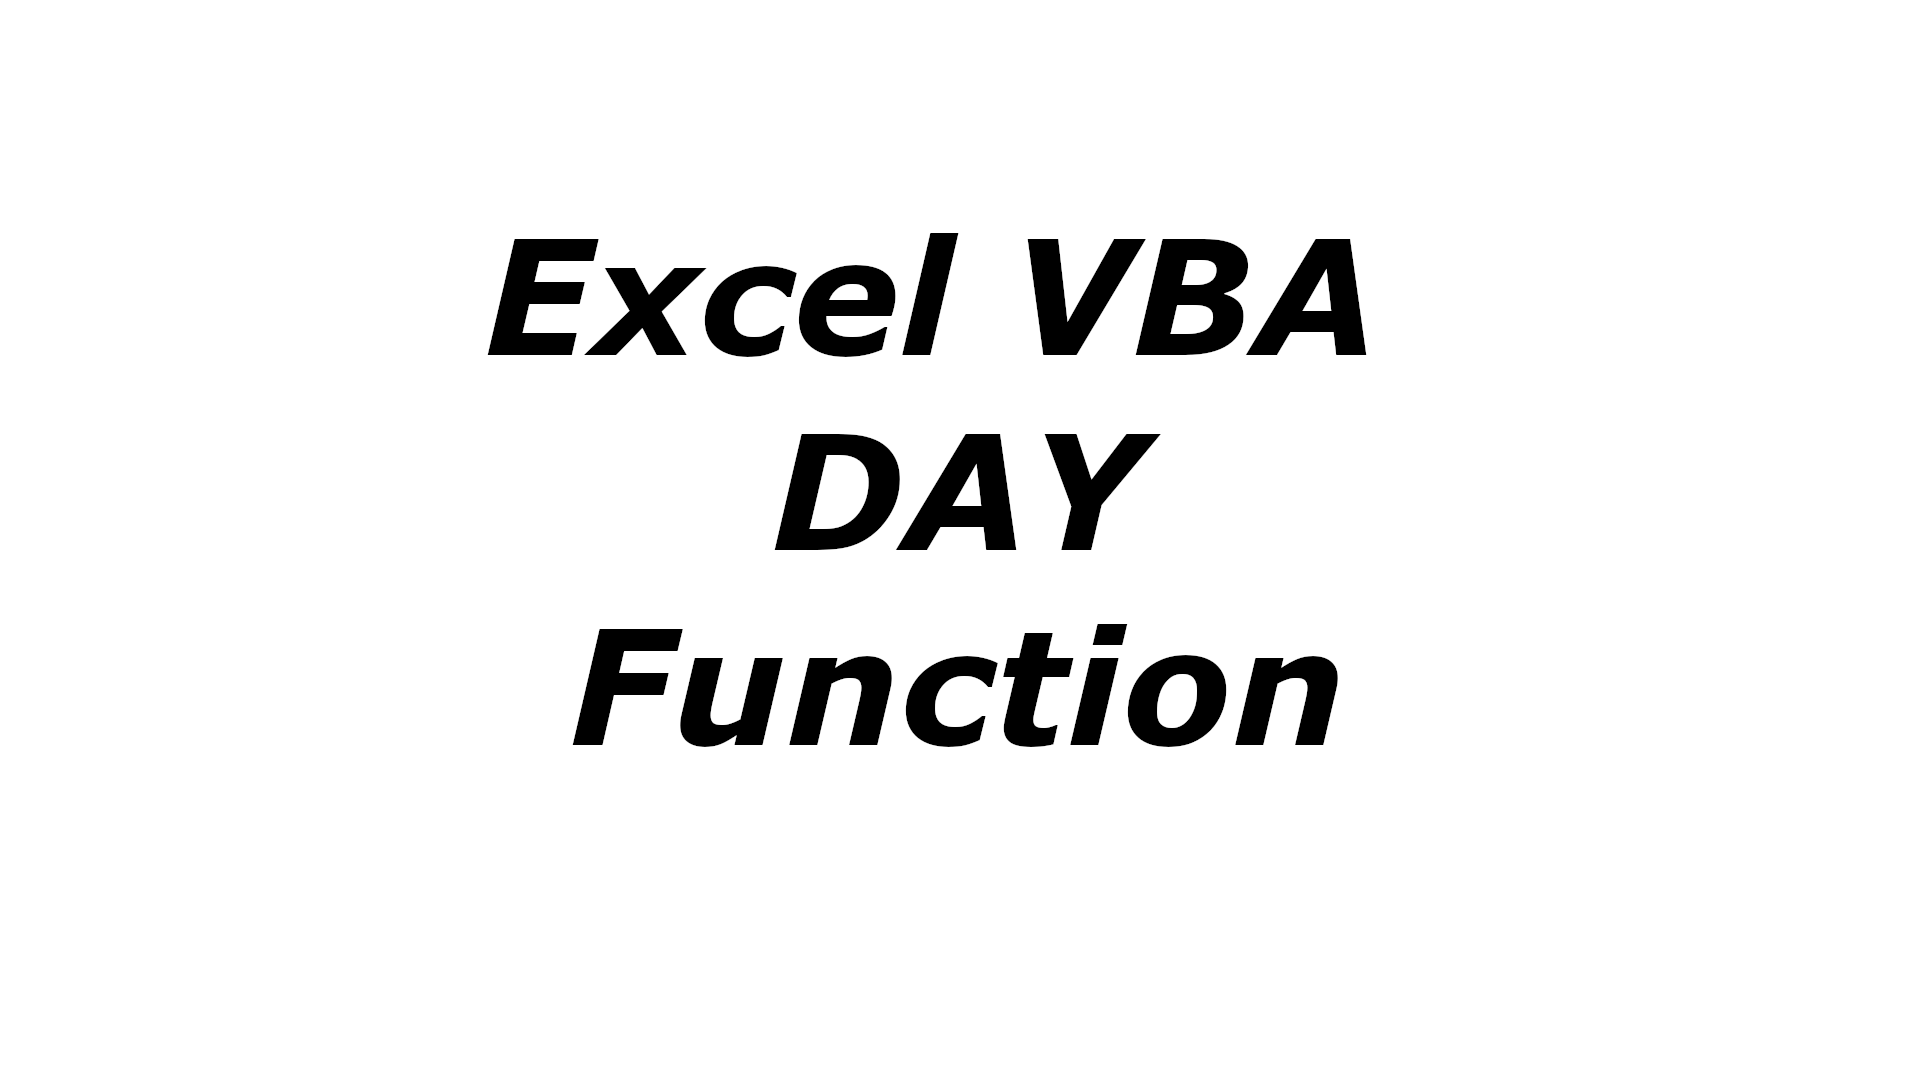 Excel VBA DAY function